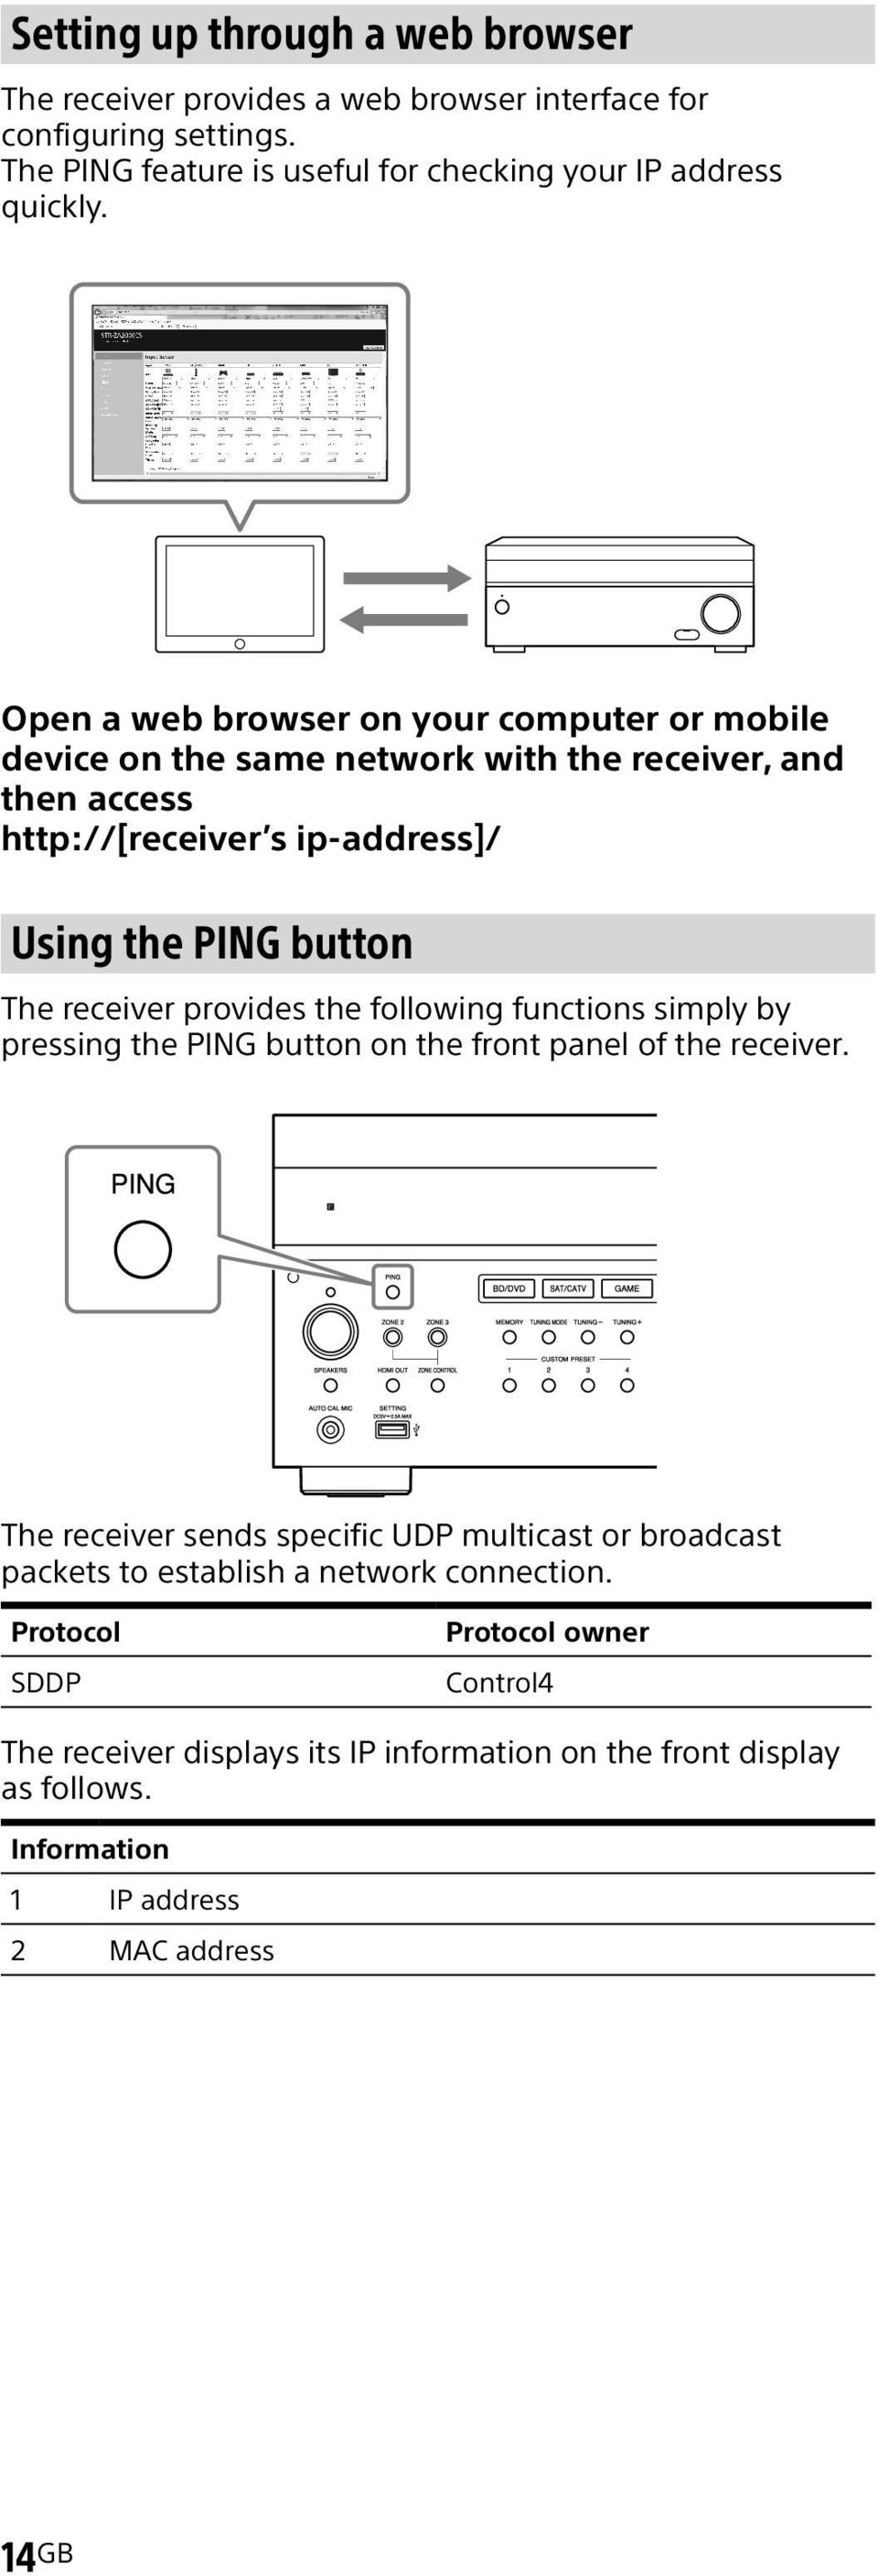 provides the following functions simply by pressing the PING button on the front panel of the receiver.